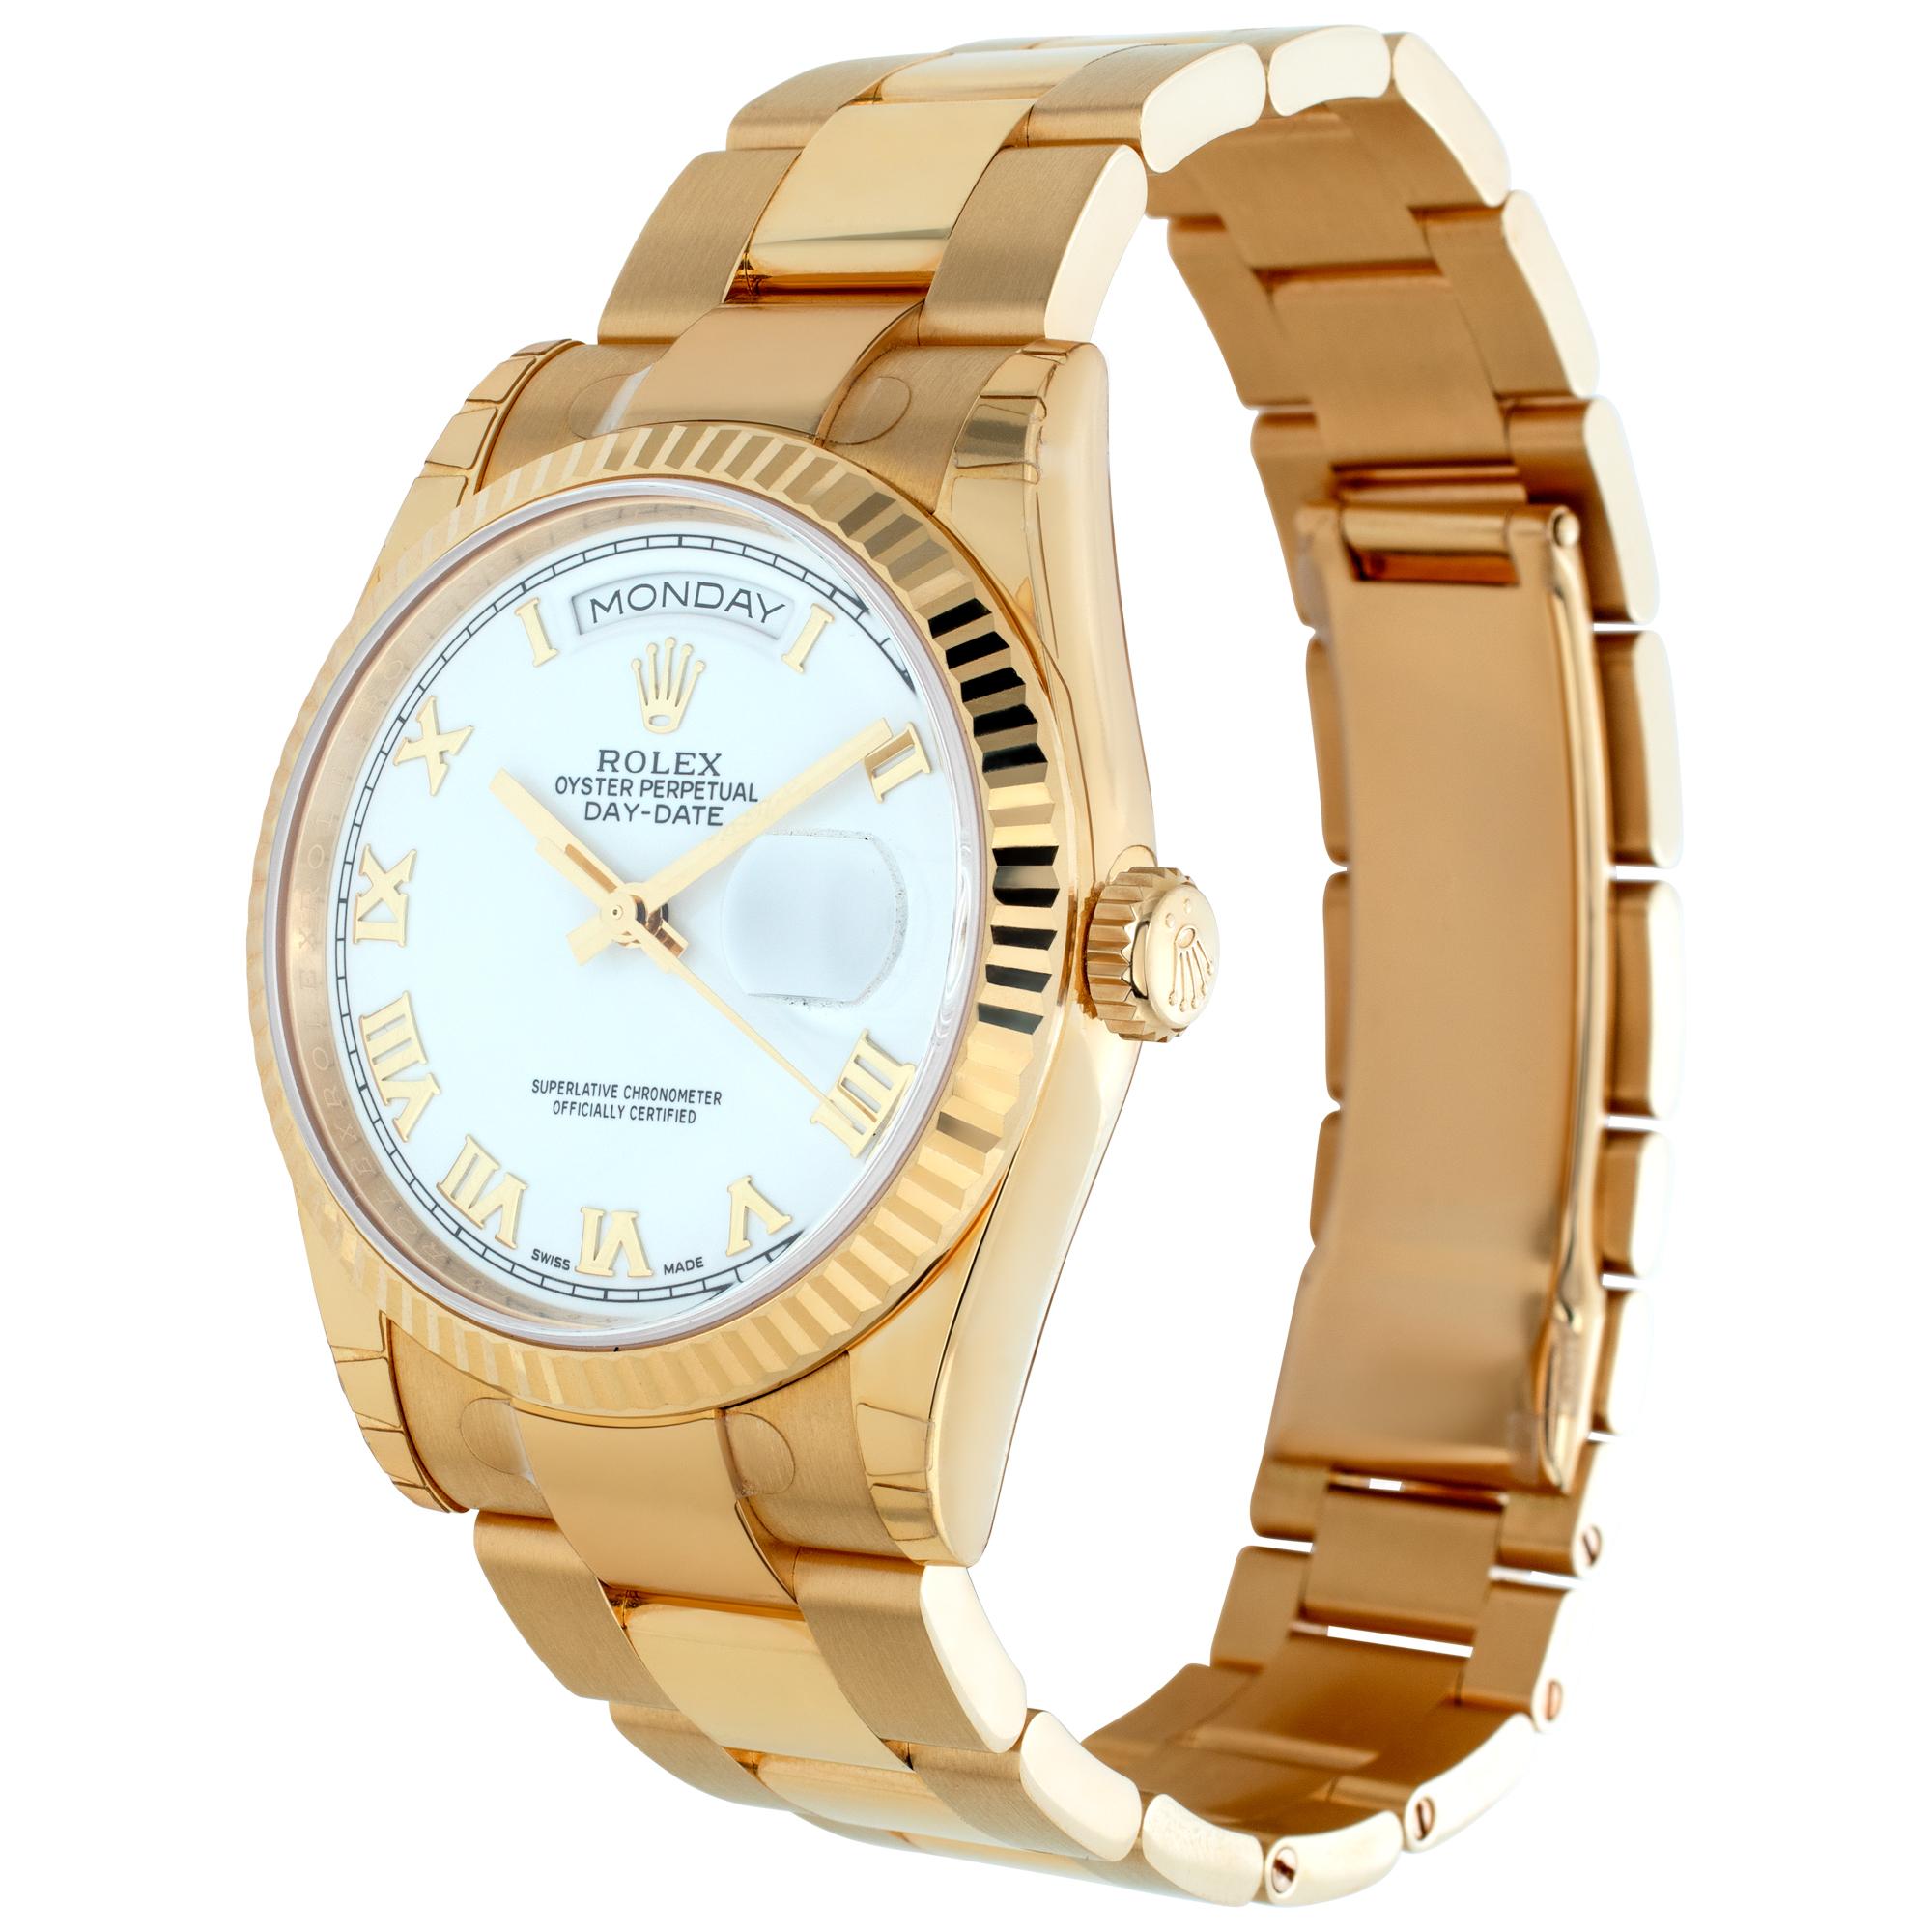 Rolex Day-Date in 18k yellow gold with white roman numeral dial on 18k oyster bracelet. Auto w/ sweep seconds, date and day. 36 mm case size. With box and booklets. **Bank wire only at this price** Ref 118238. Circa 2010s. Fine Pre-owned Rolex